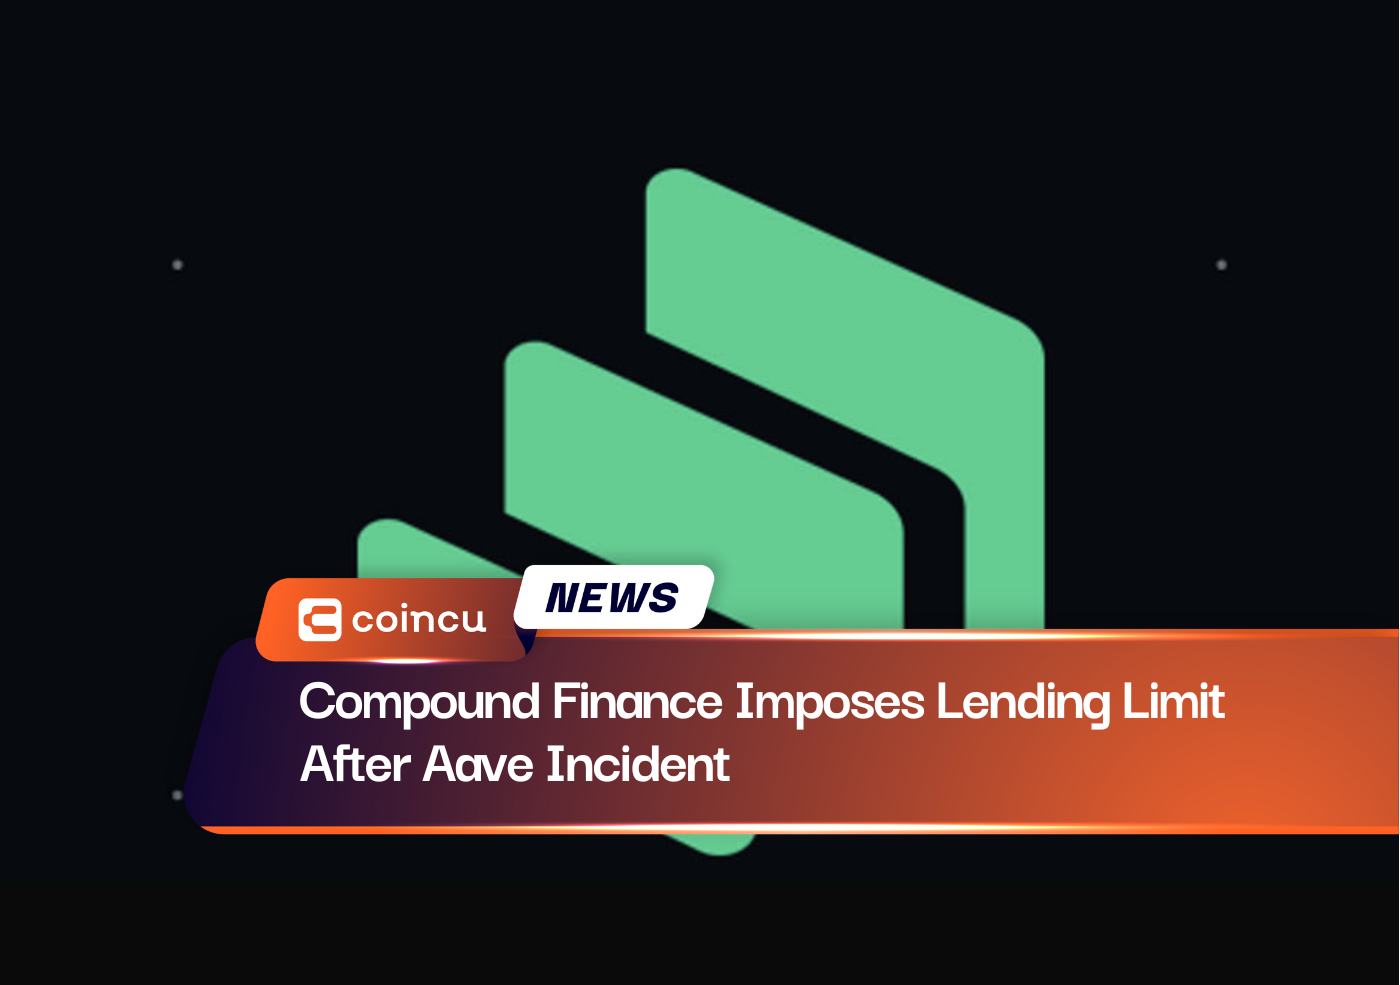 Compound Finance Imposes Lending Limit After Aave Incident